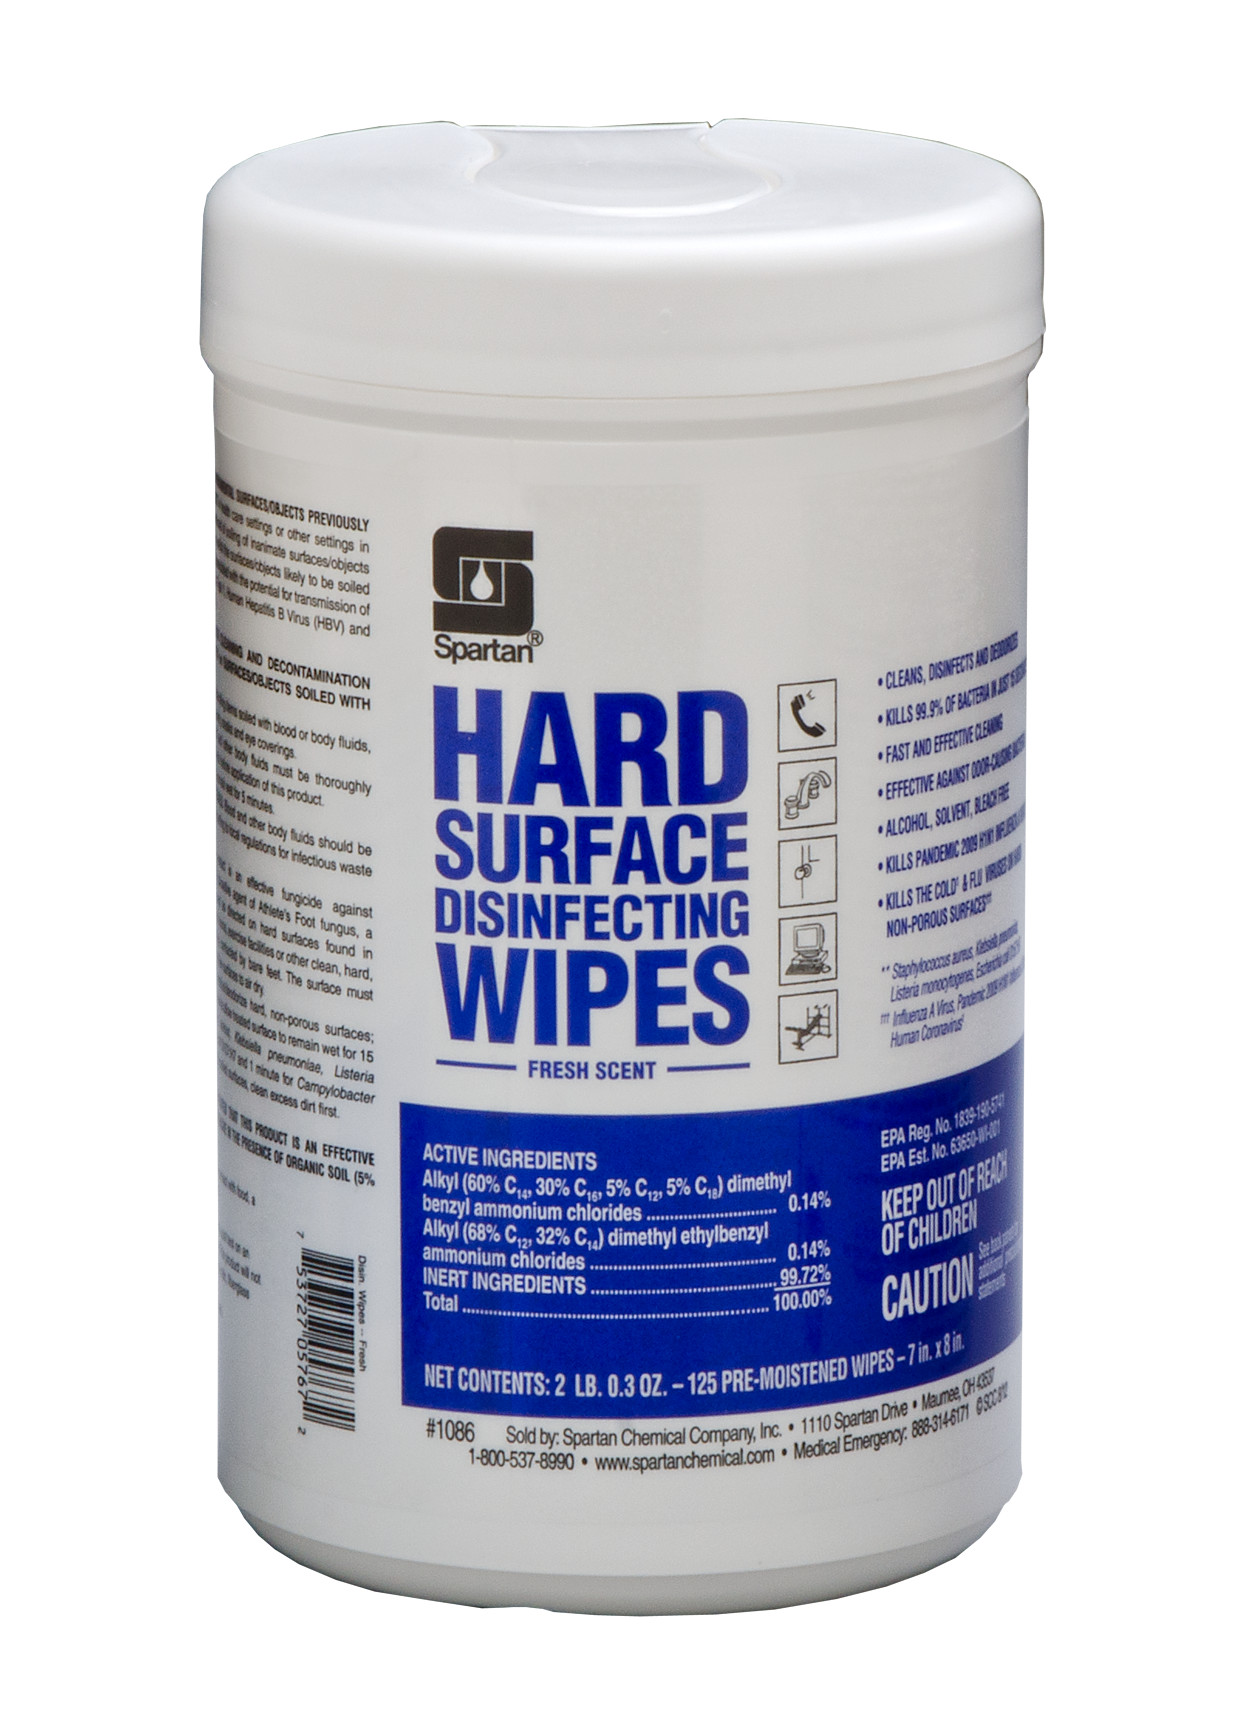 Hard+Surface+Disinfecting+Wipes+%28Fresh+Scent%29+%7B125+wipes+%286+per+case%29%7D